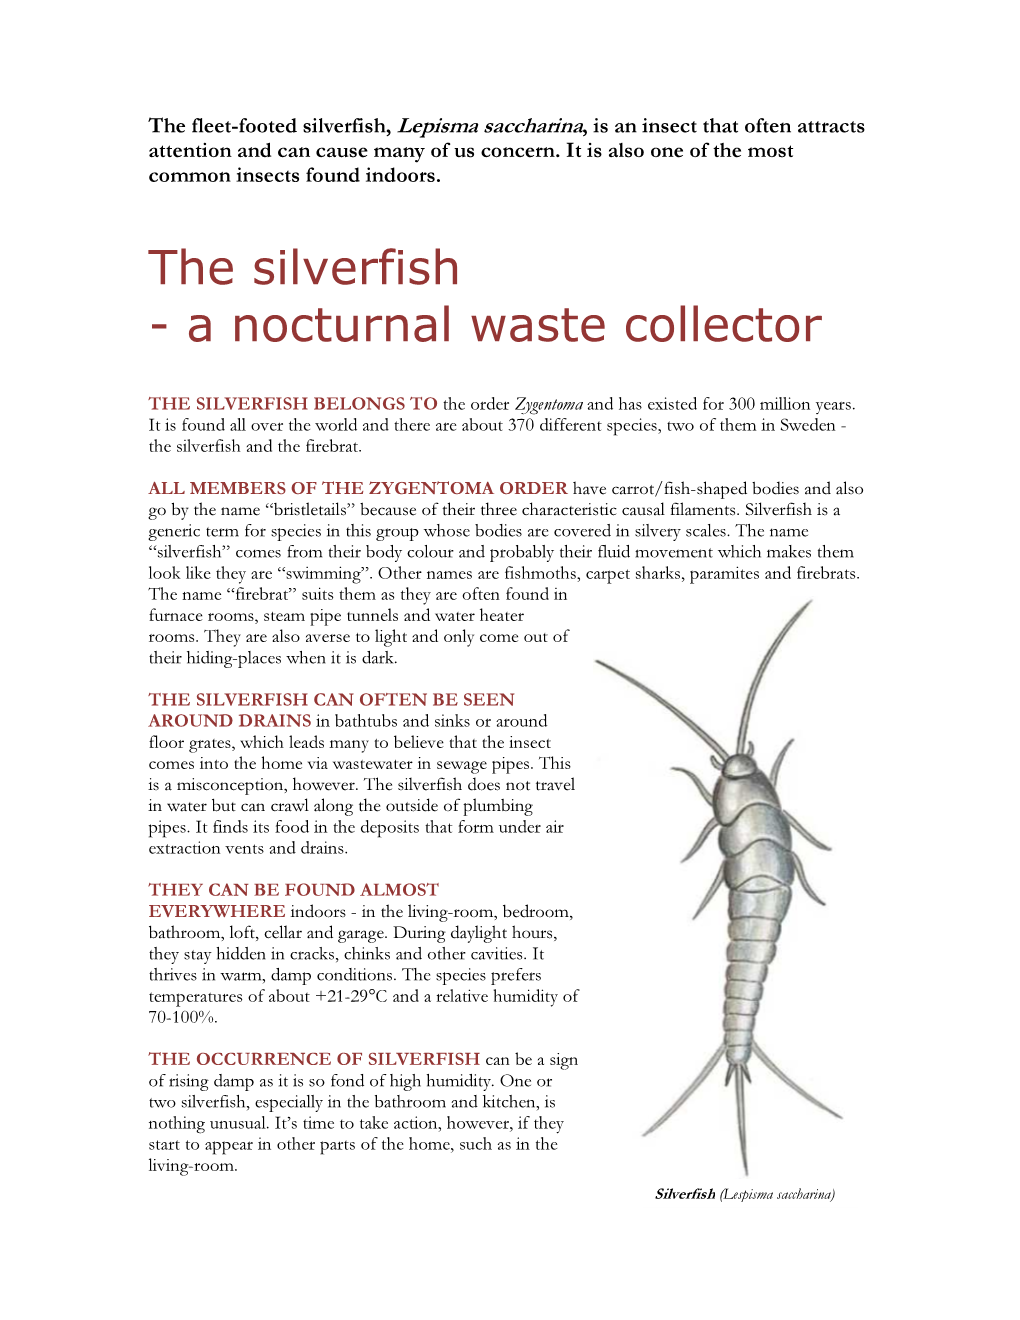 The Silverfish - a Nocturnal Waste Collector